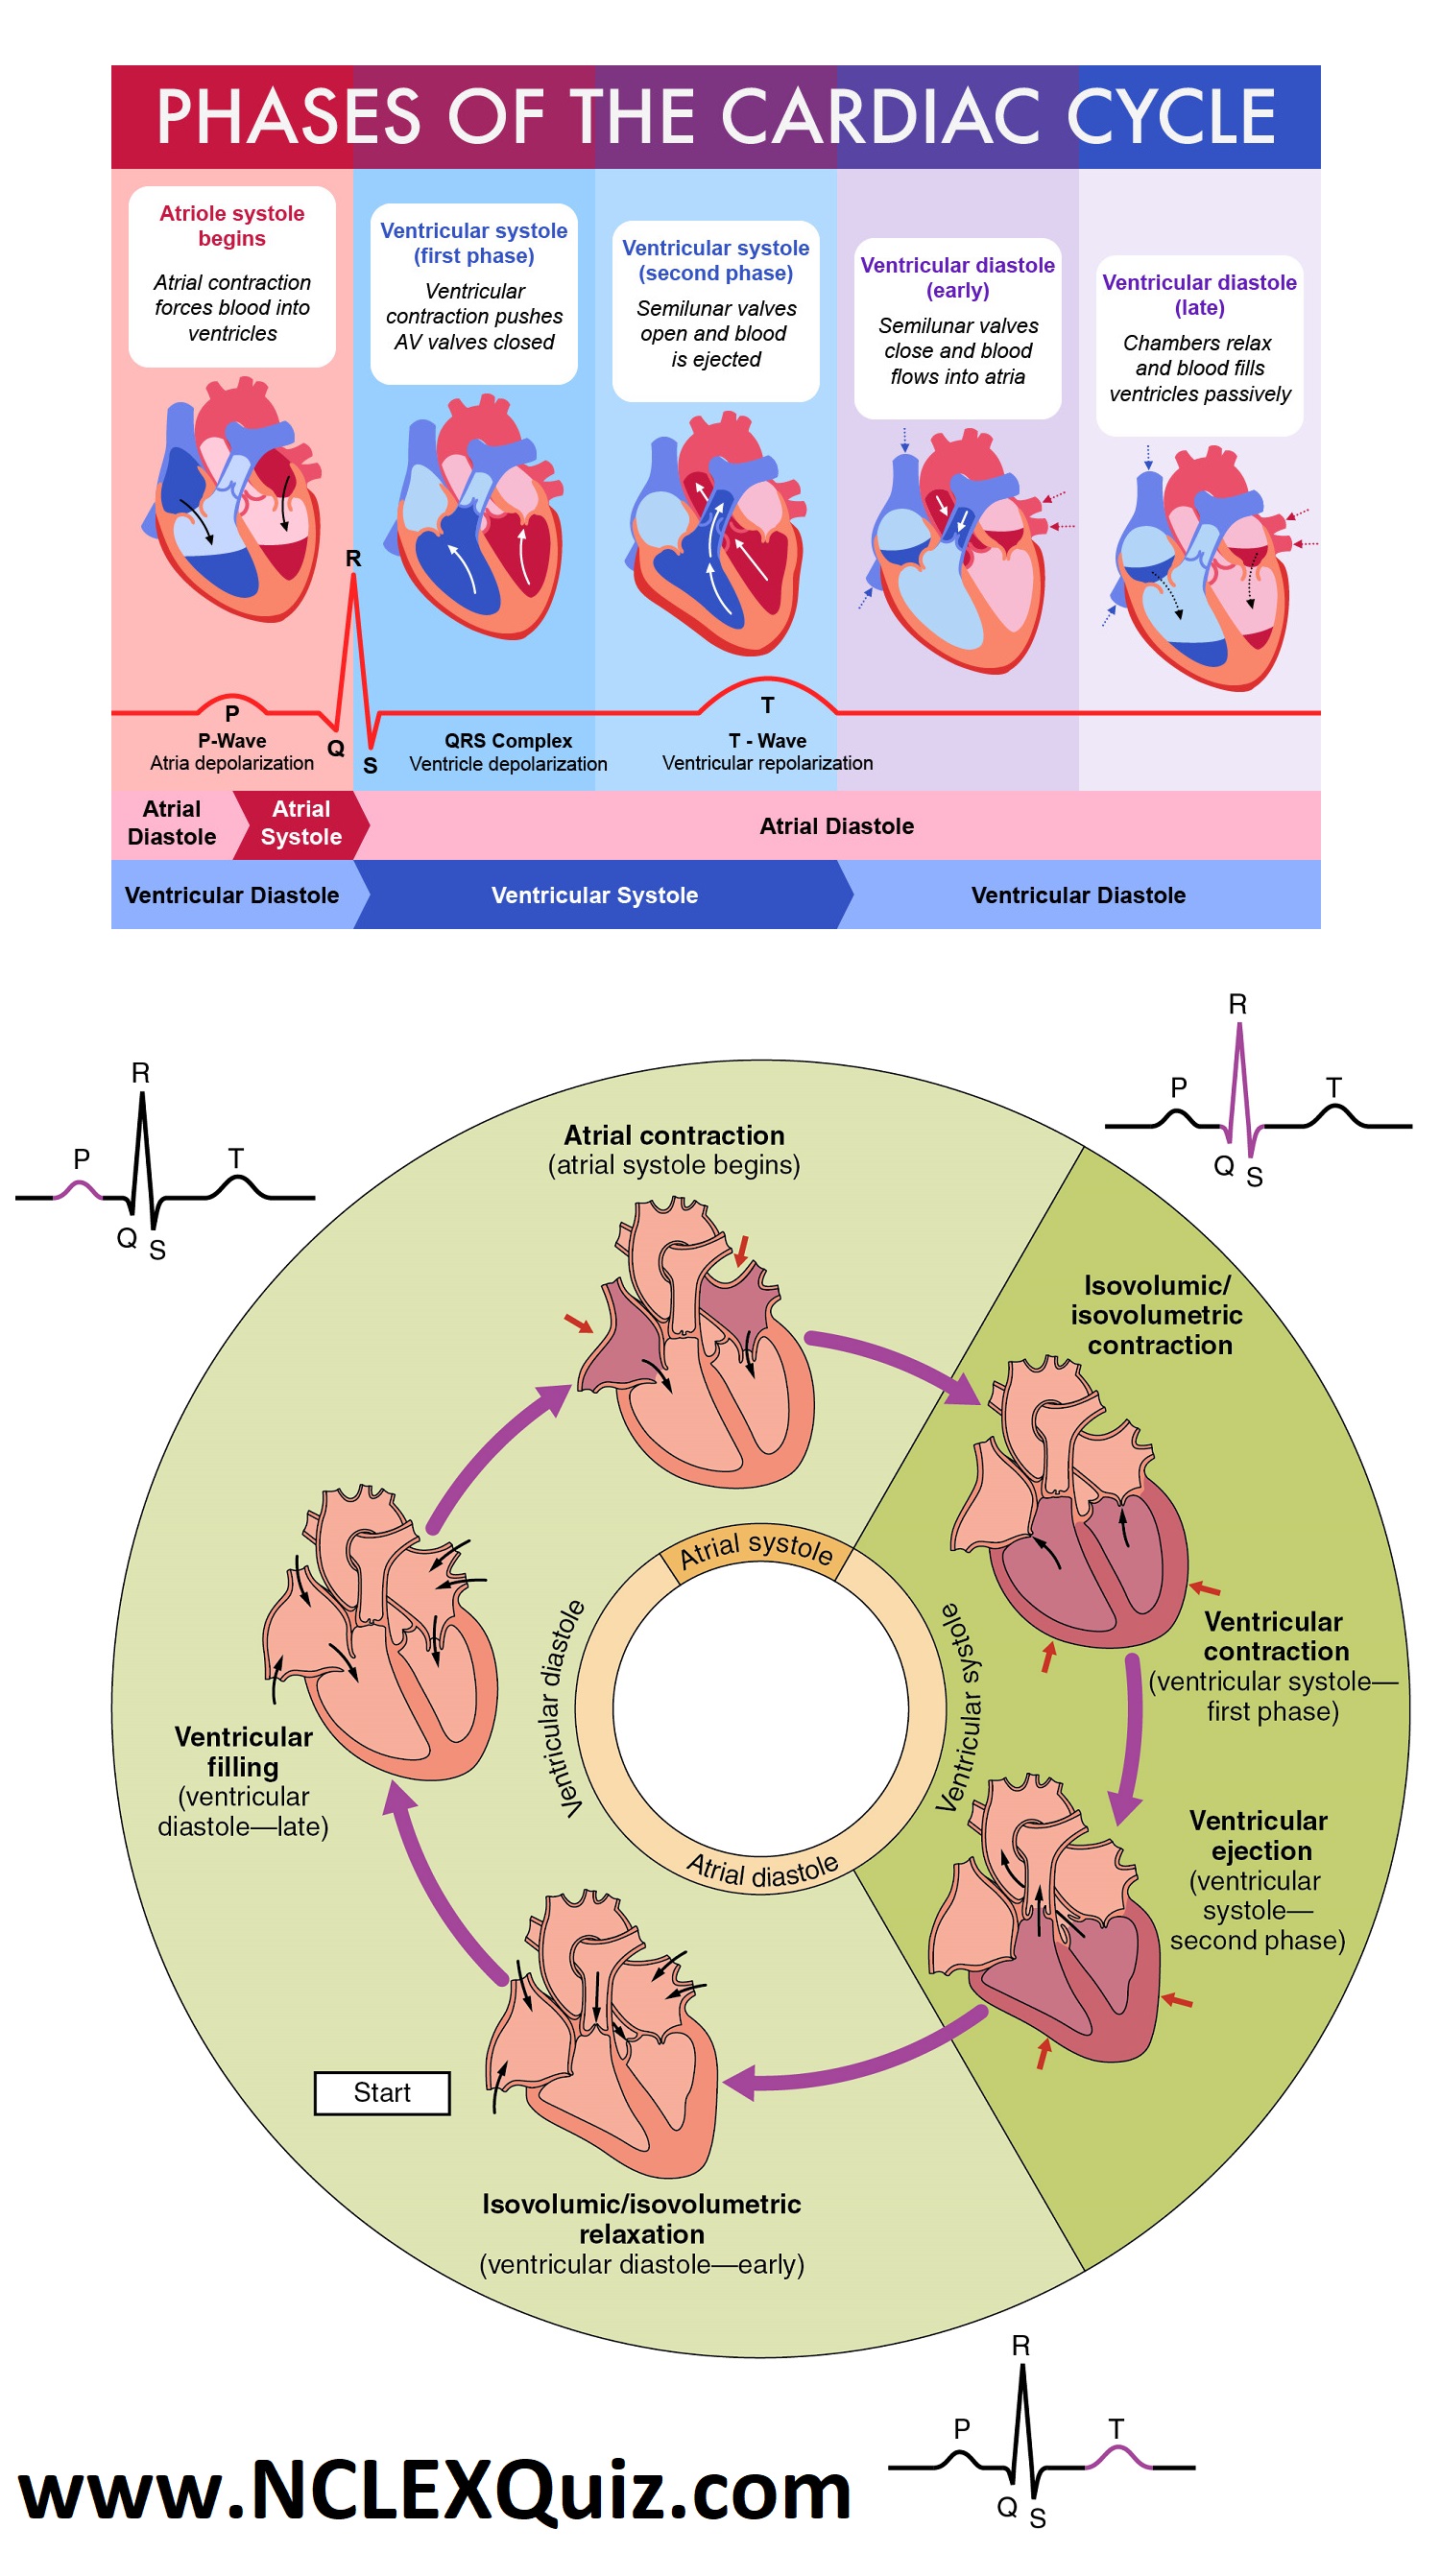 NCLEX Cheat Sheets: Phases of the cardiac cycle PQRST Wave for Nursing Students